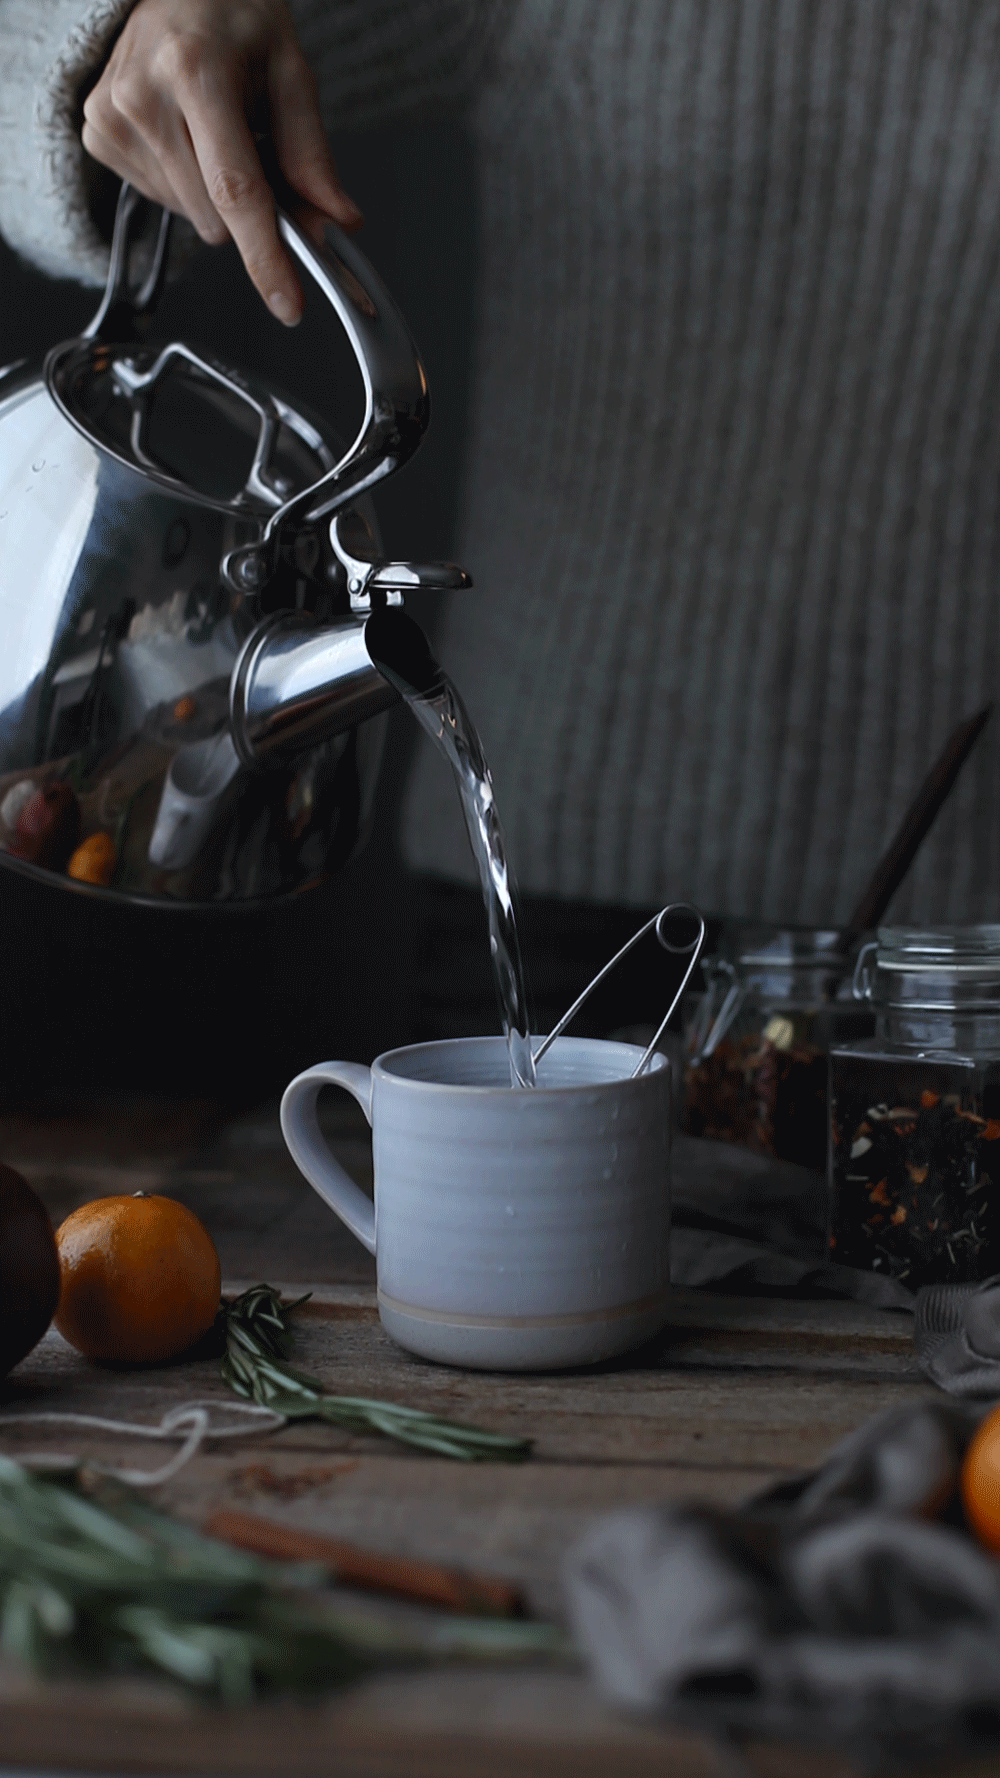 cinemagraph of water water being poured into a cup.